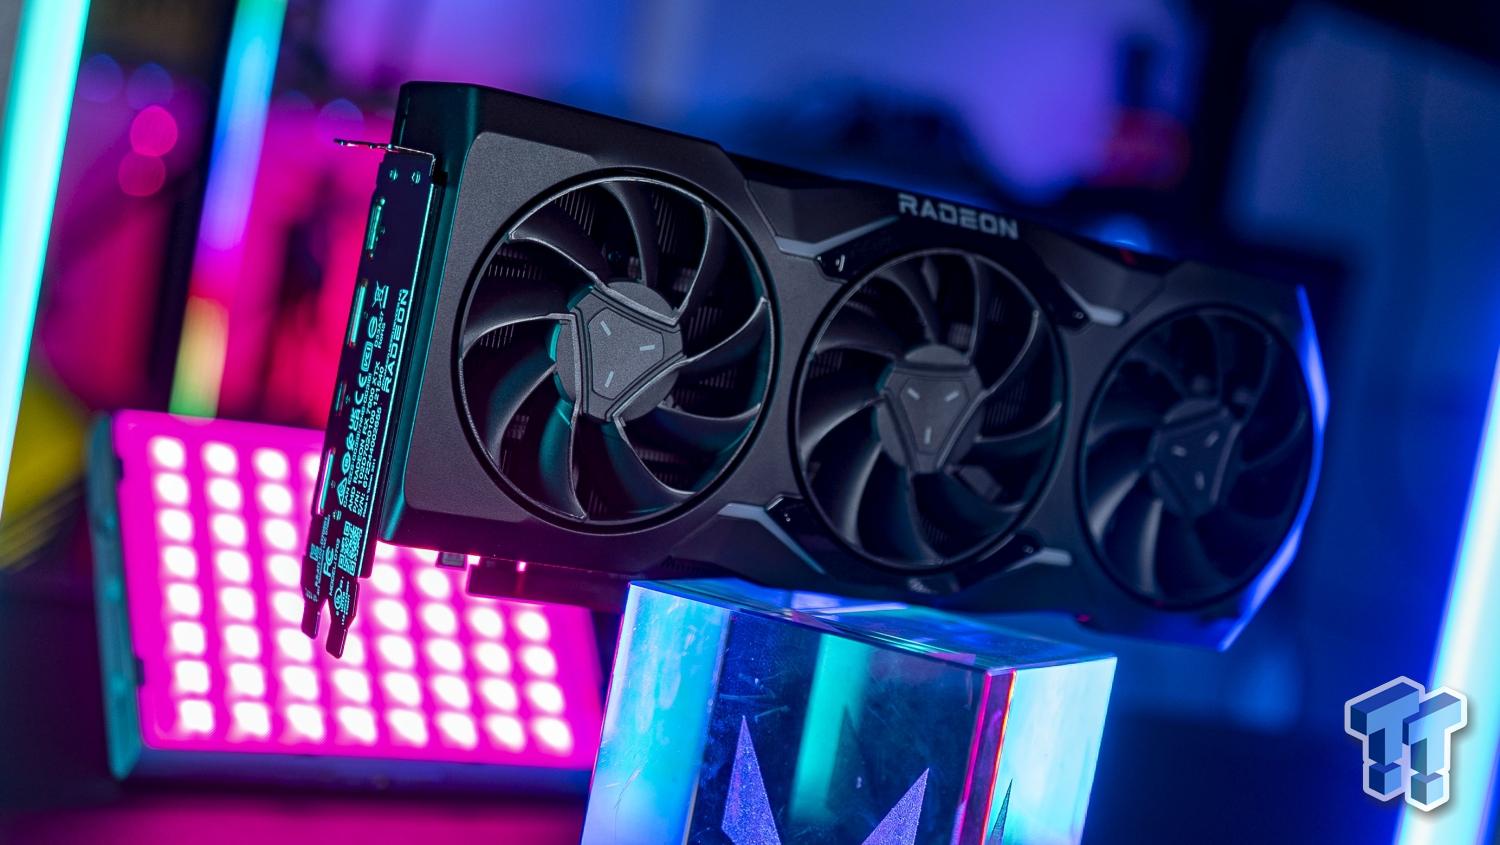 AMD Radeon RX 7900 XT Review: The Entry-Level Of Enthusiast